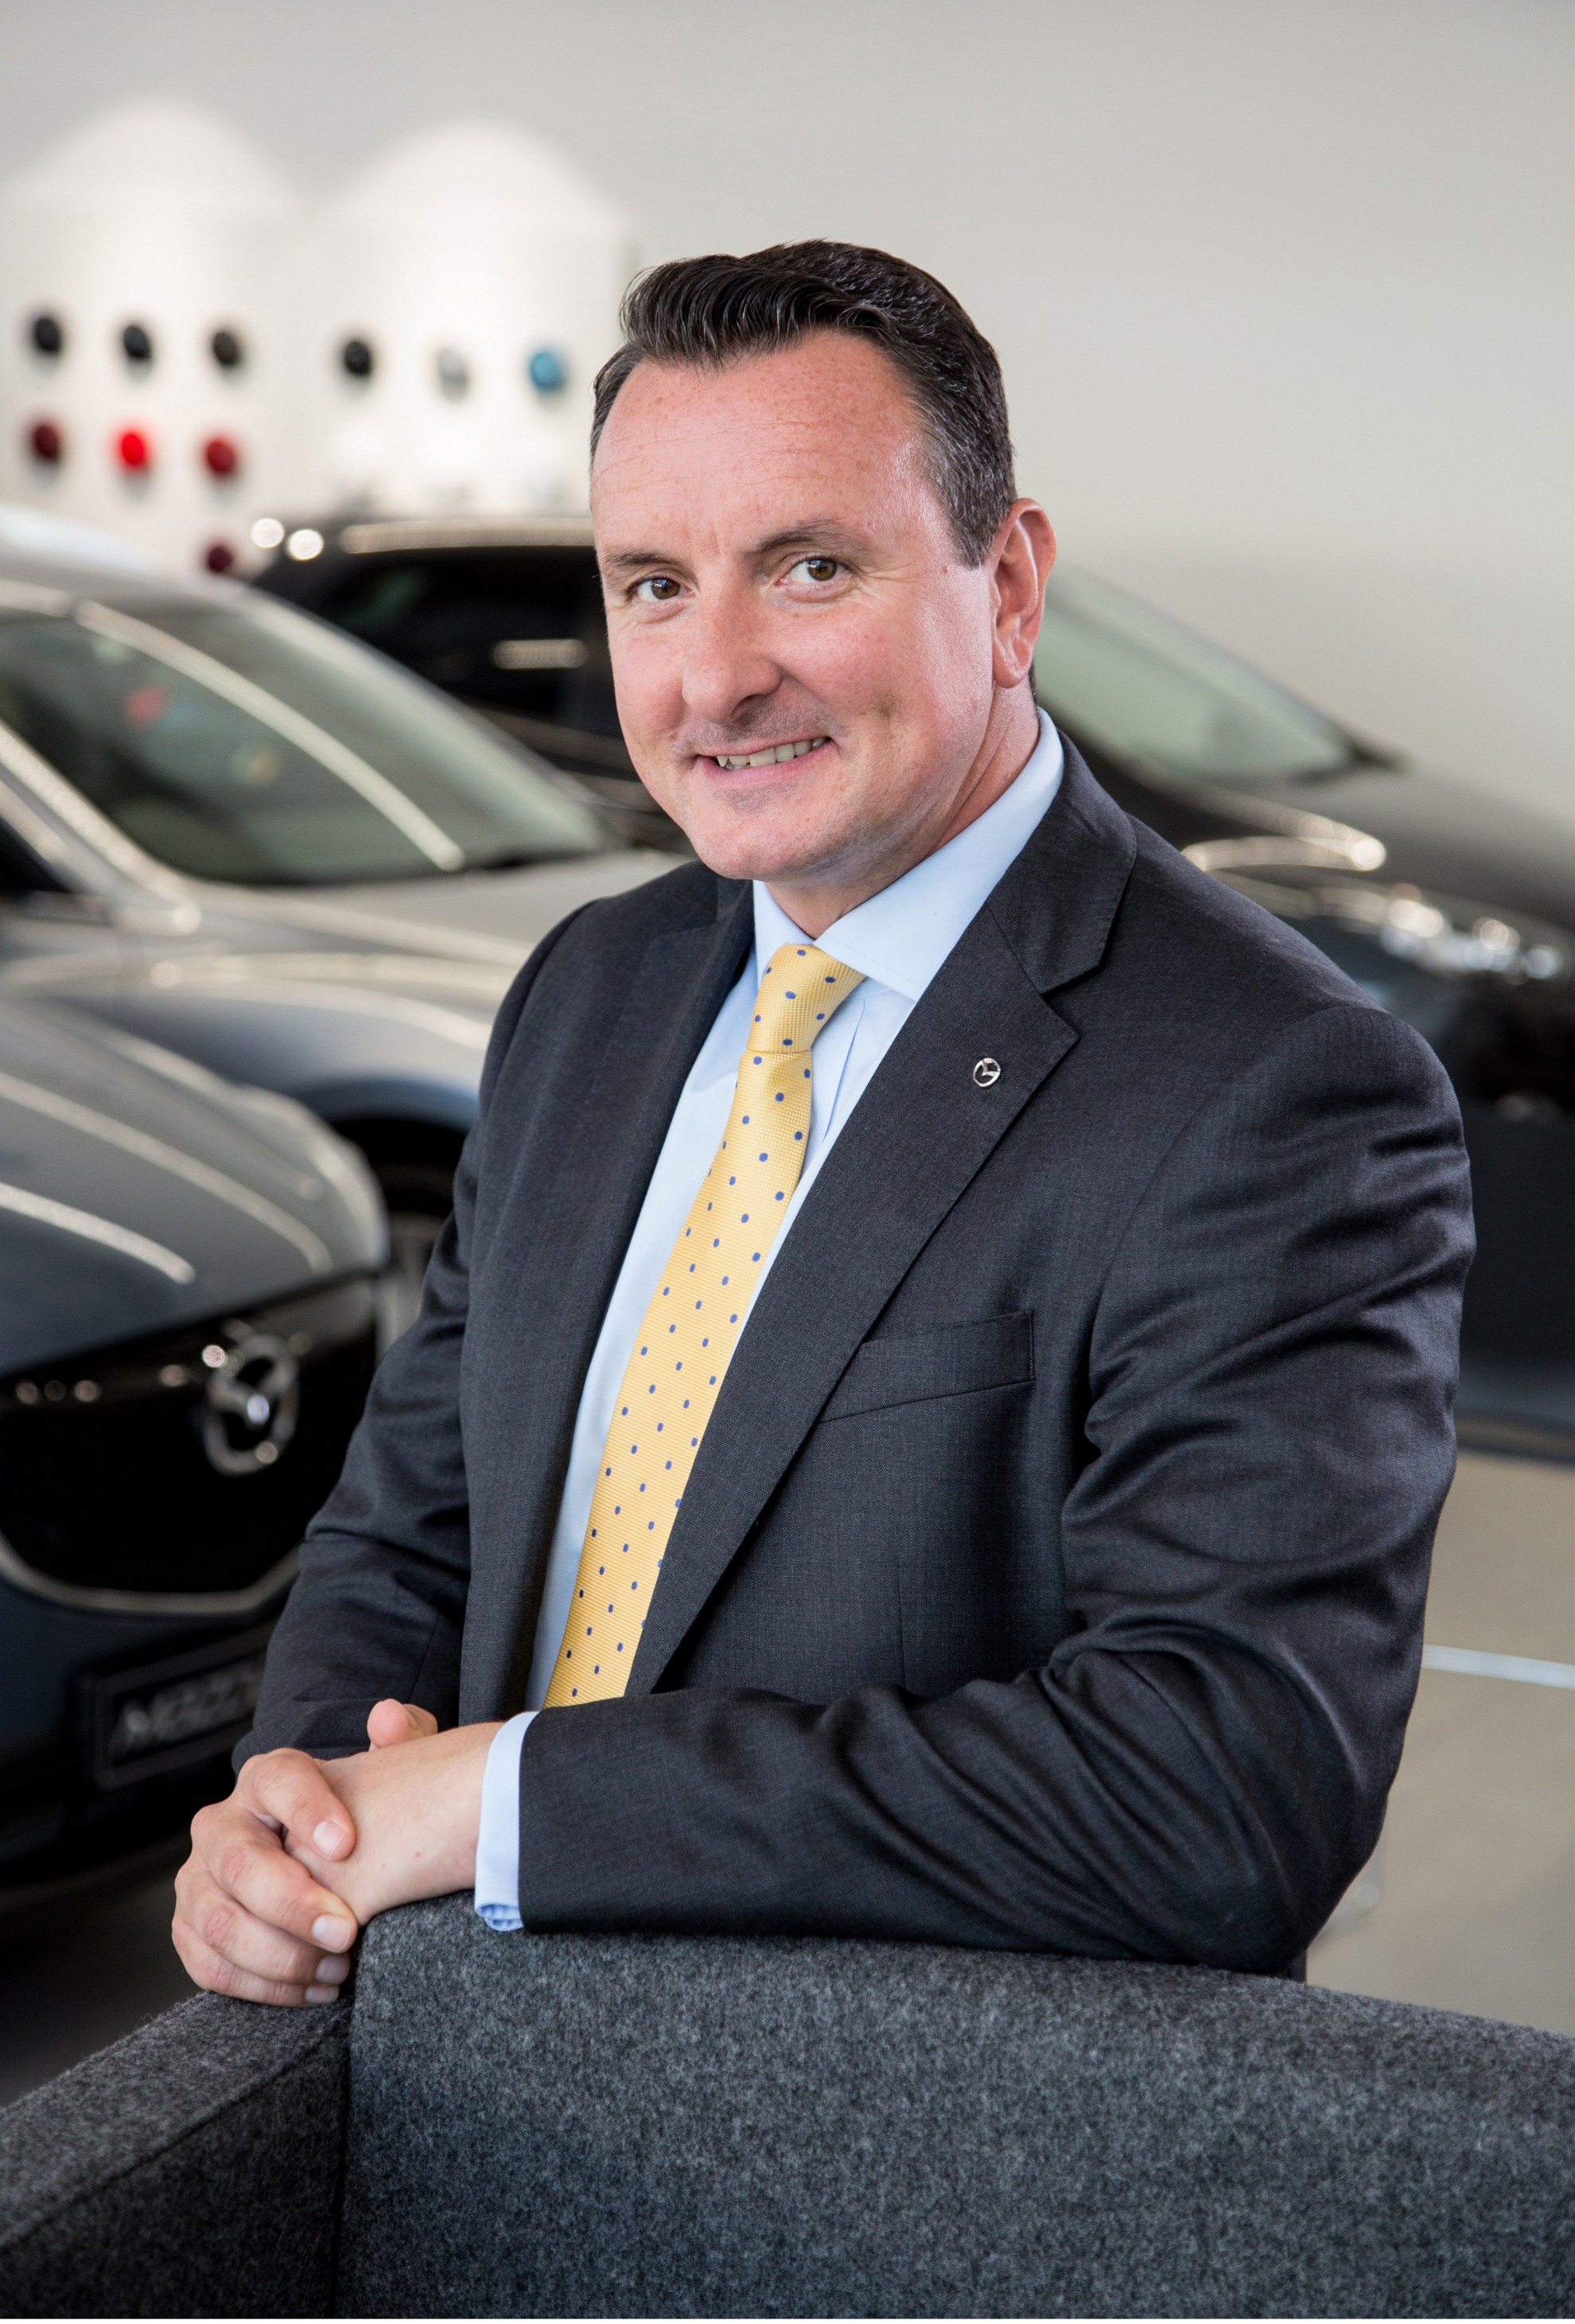 MAZDA DELIVERS A 21 PER CENT GROWTH